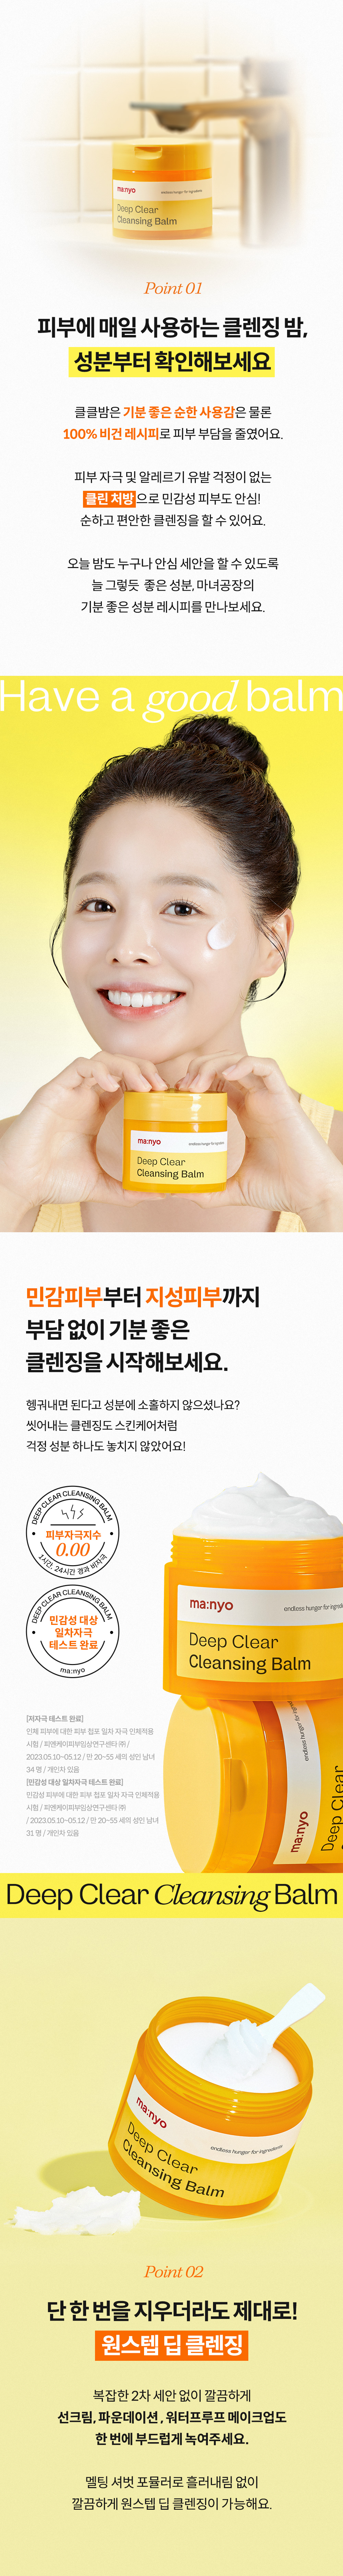 CleansingBalm_page_5